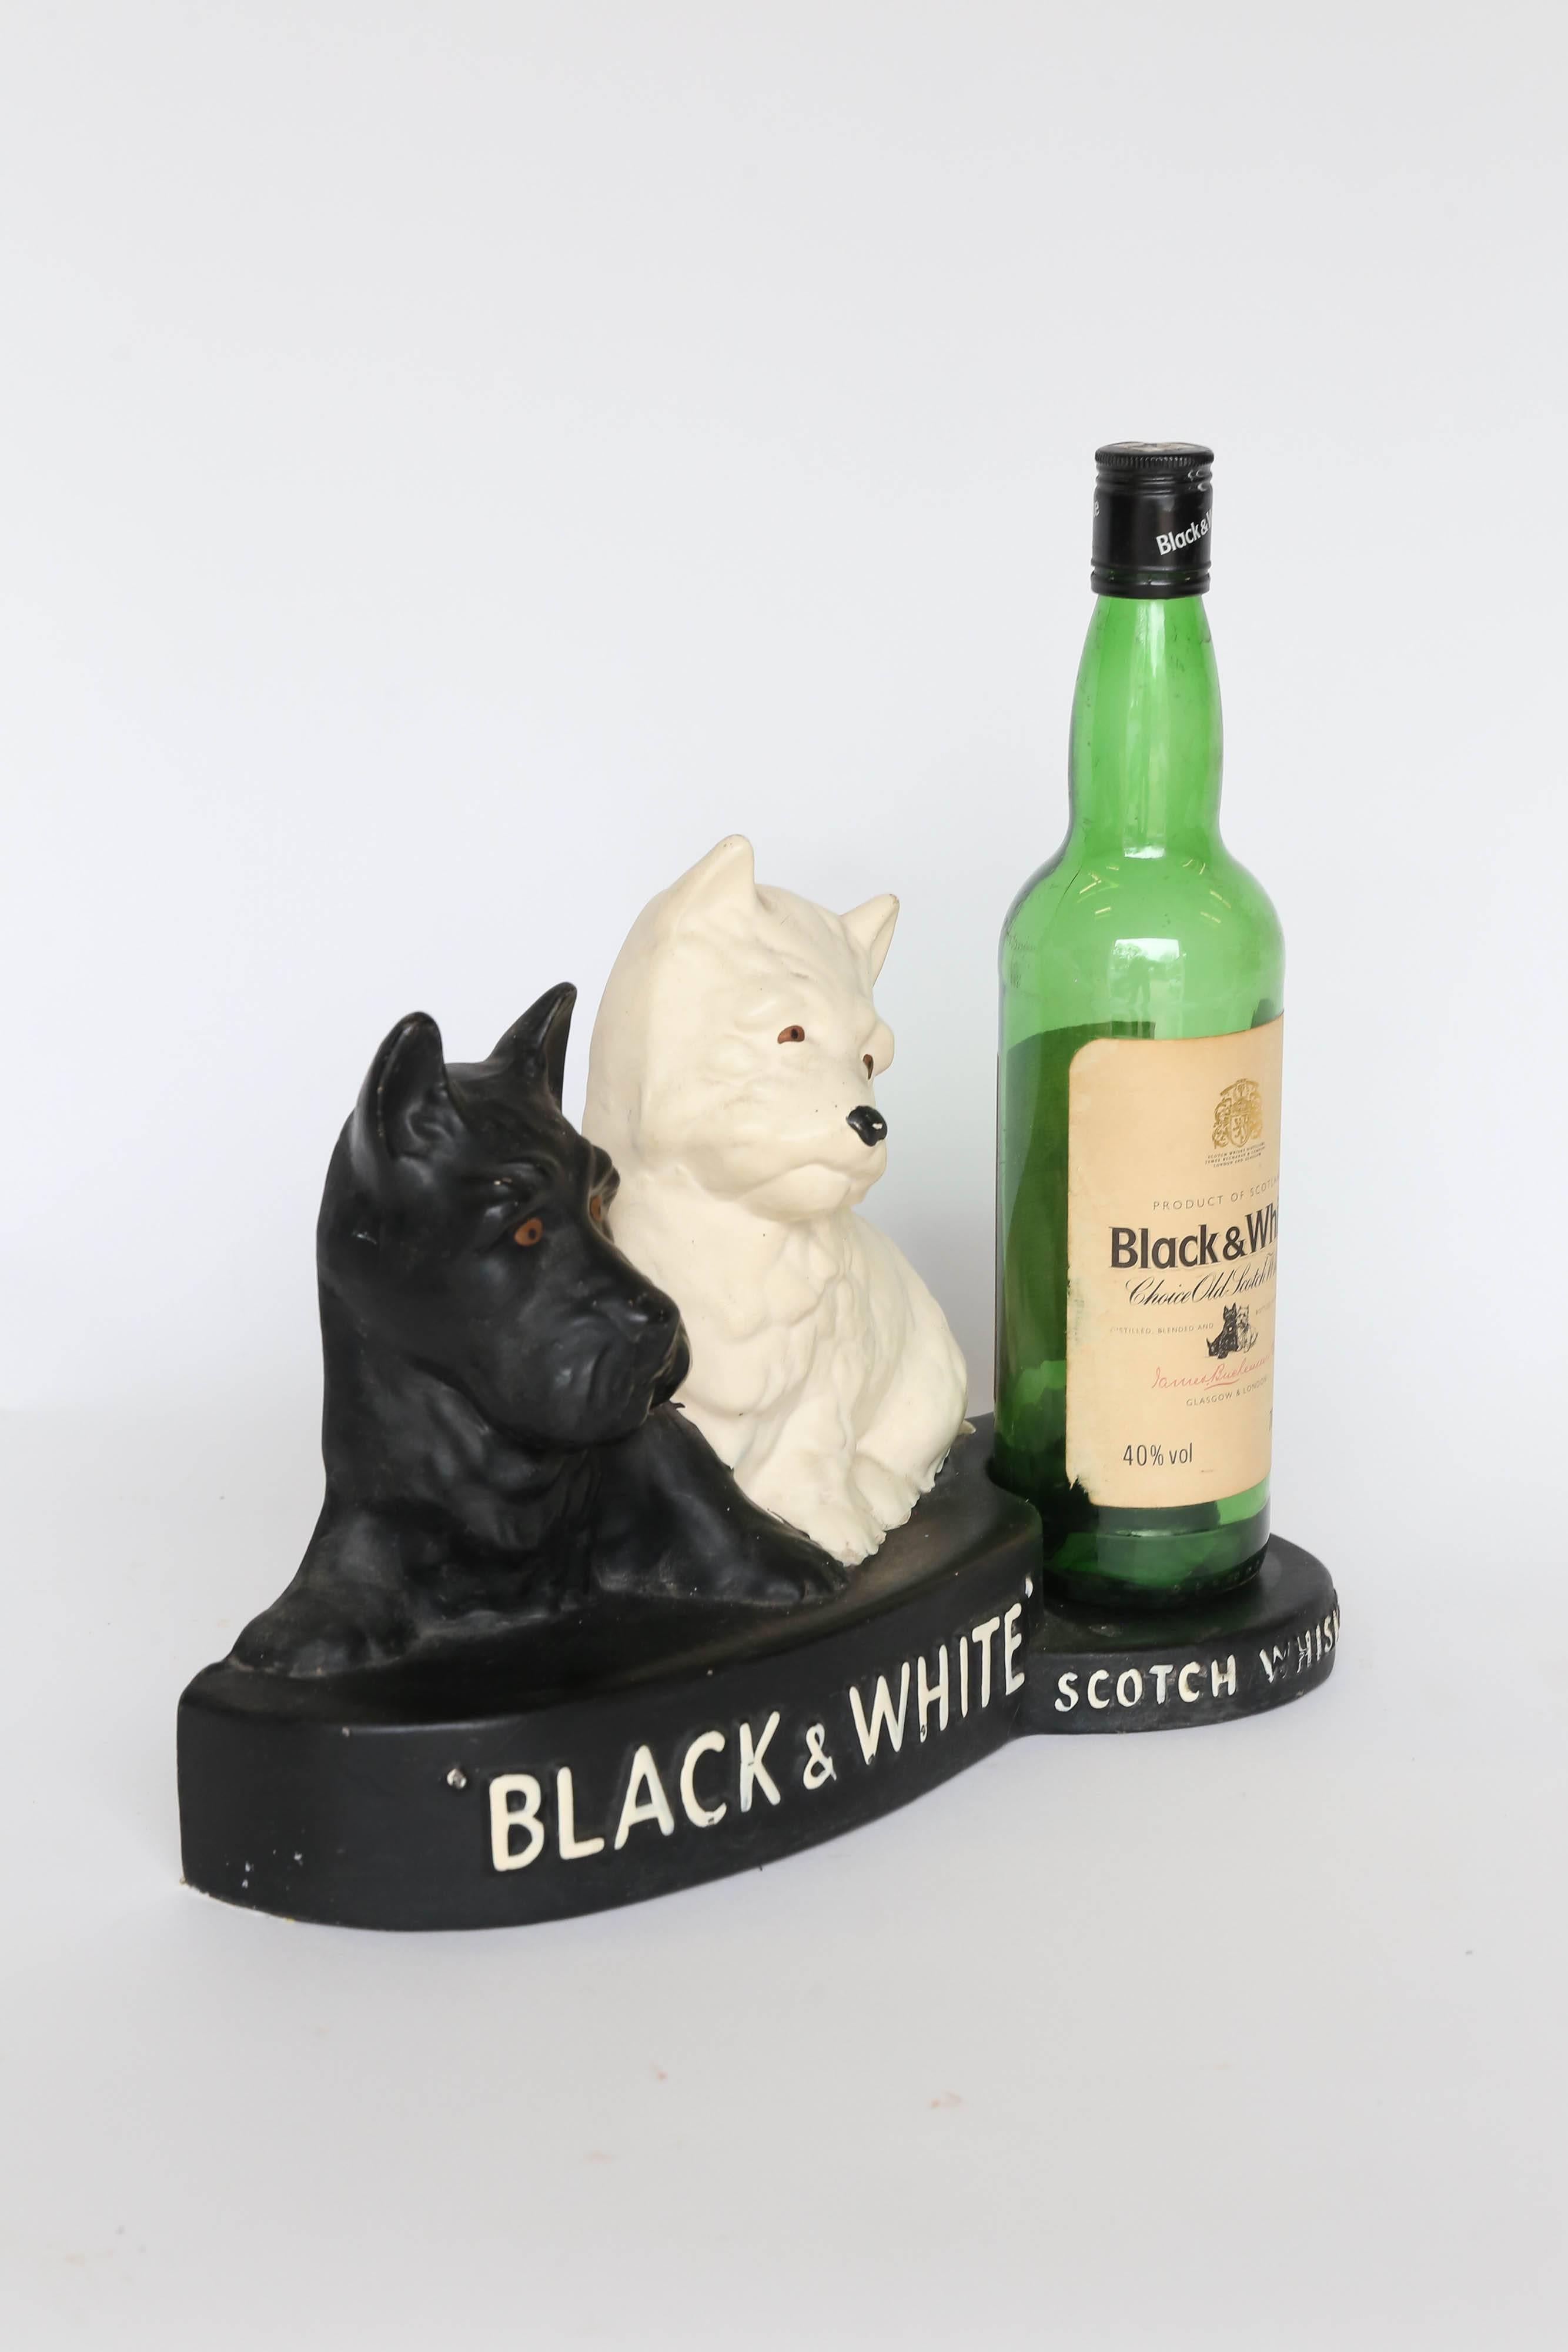 Black and white Whisky brand's motif featuring a black Scottish Terrier and a white West Highland White Terrier with a bottle was used in advertising the brand. This is a lovely collectable - for the lovers of both Scottie Dogs and West Highland